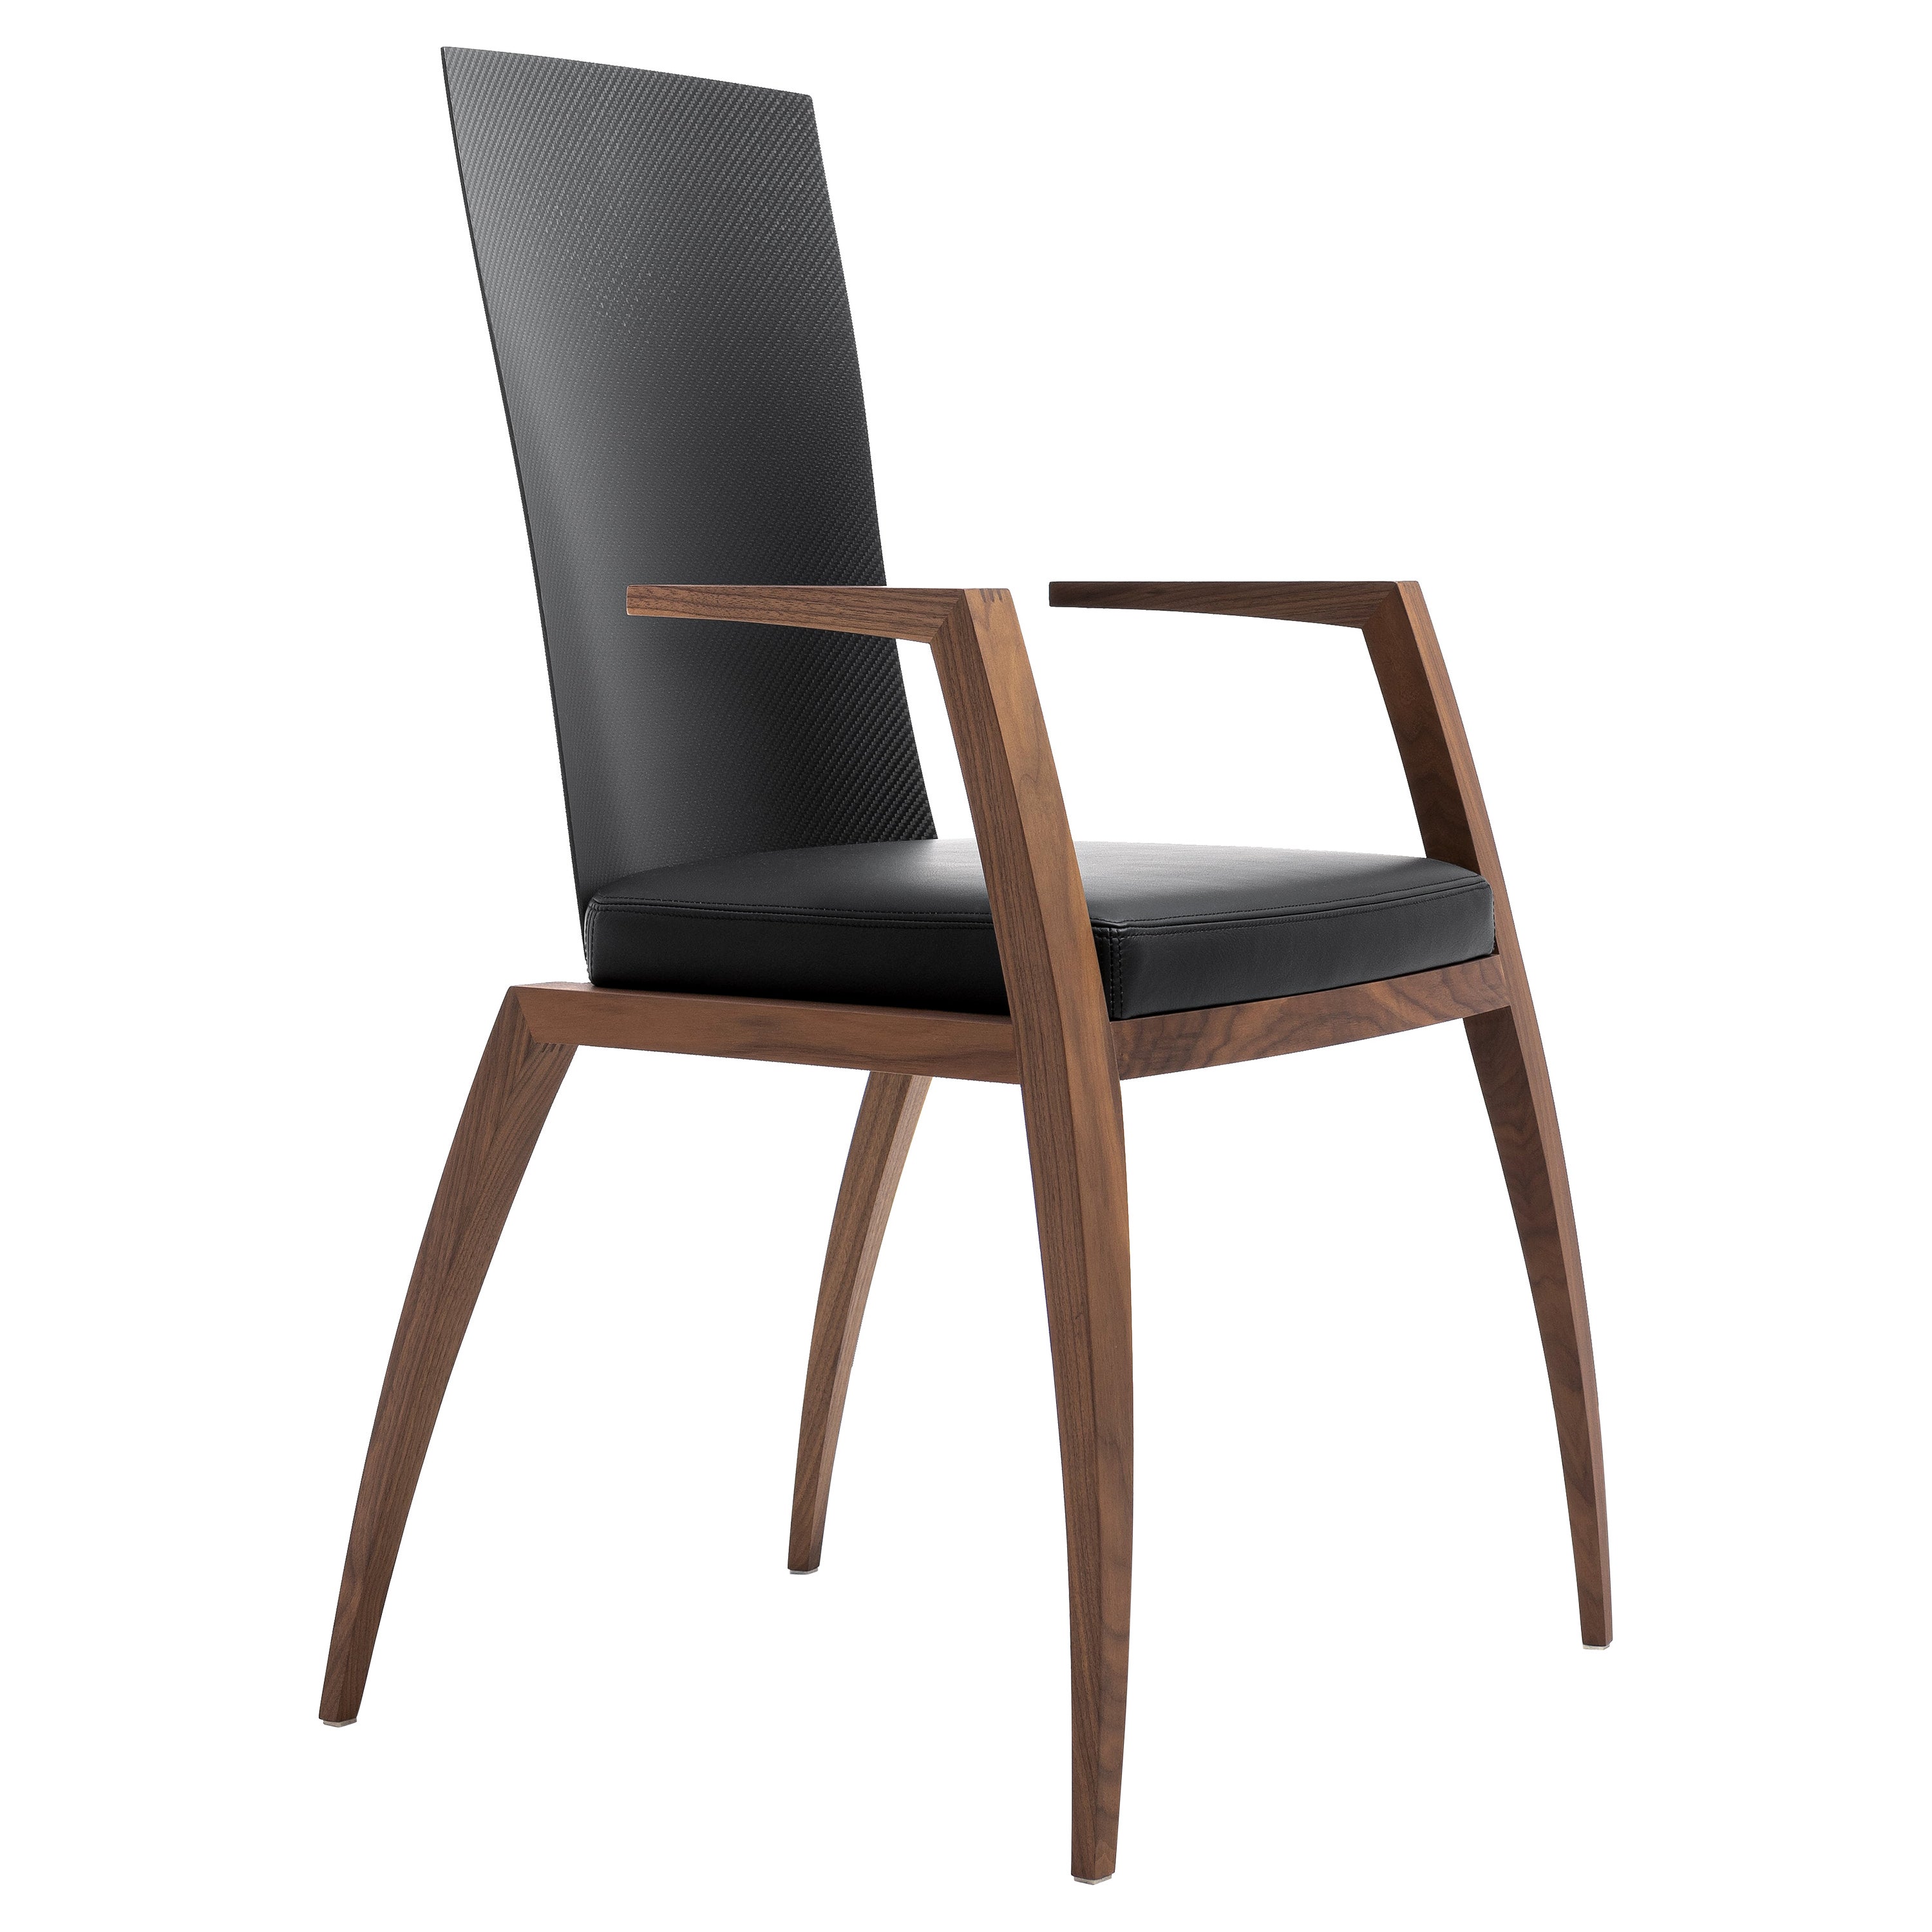 Modern Design Chair with Armrests, Made in Canaletto Walnut and Carbon Fiber